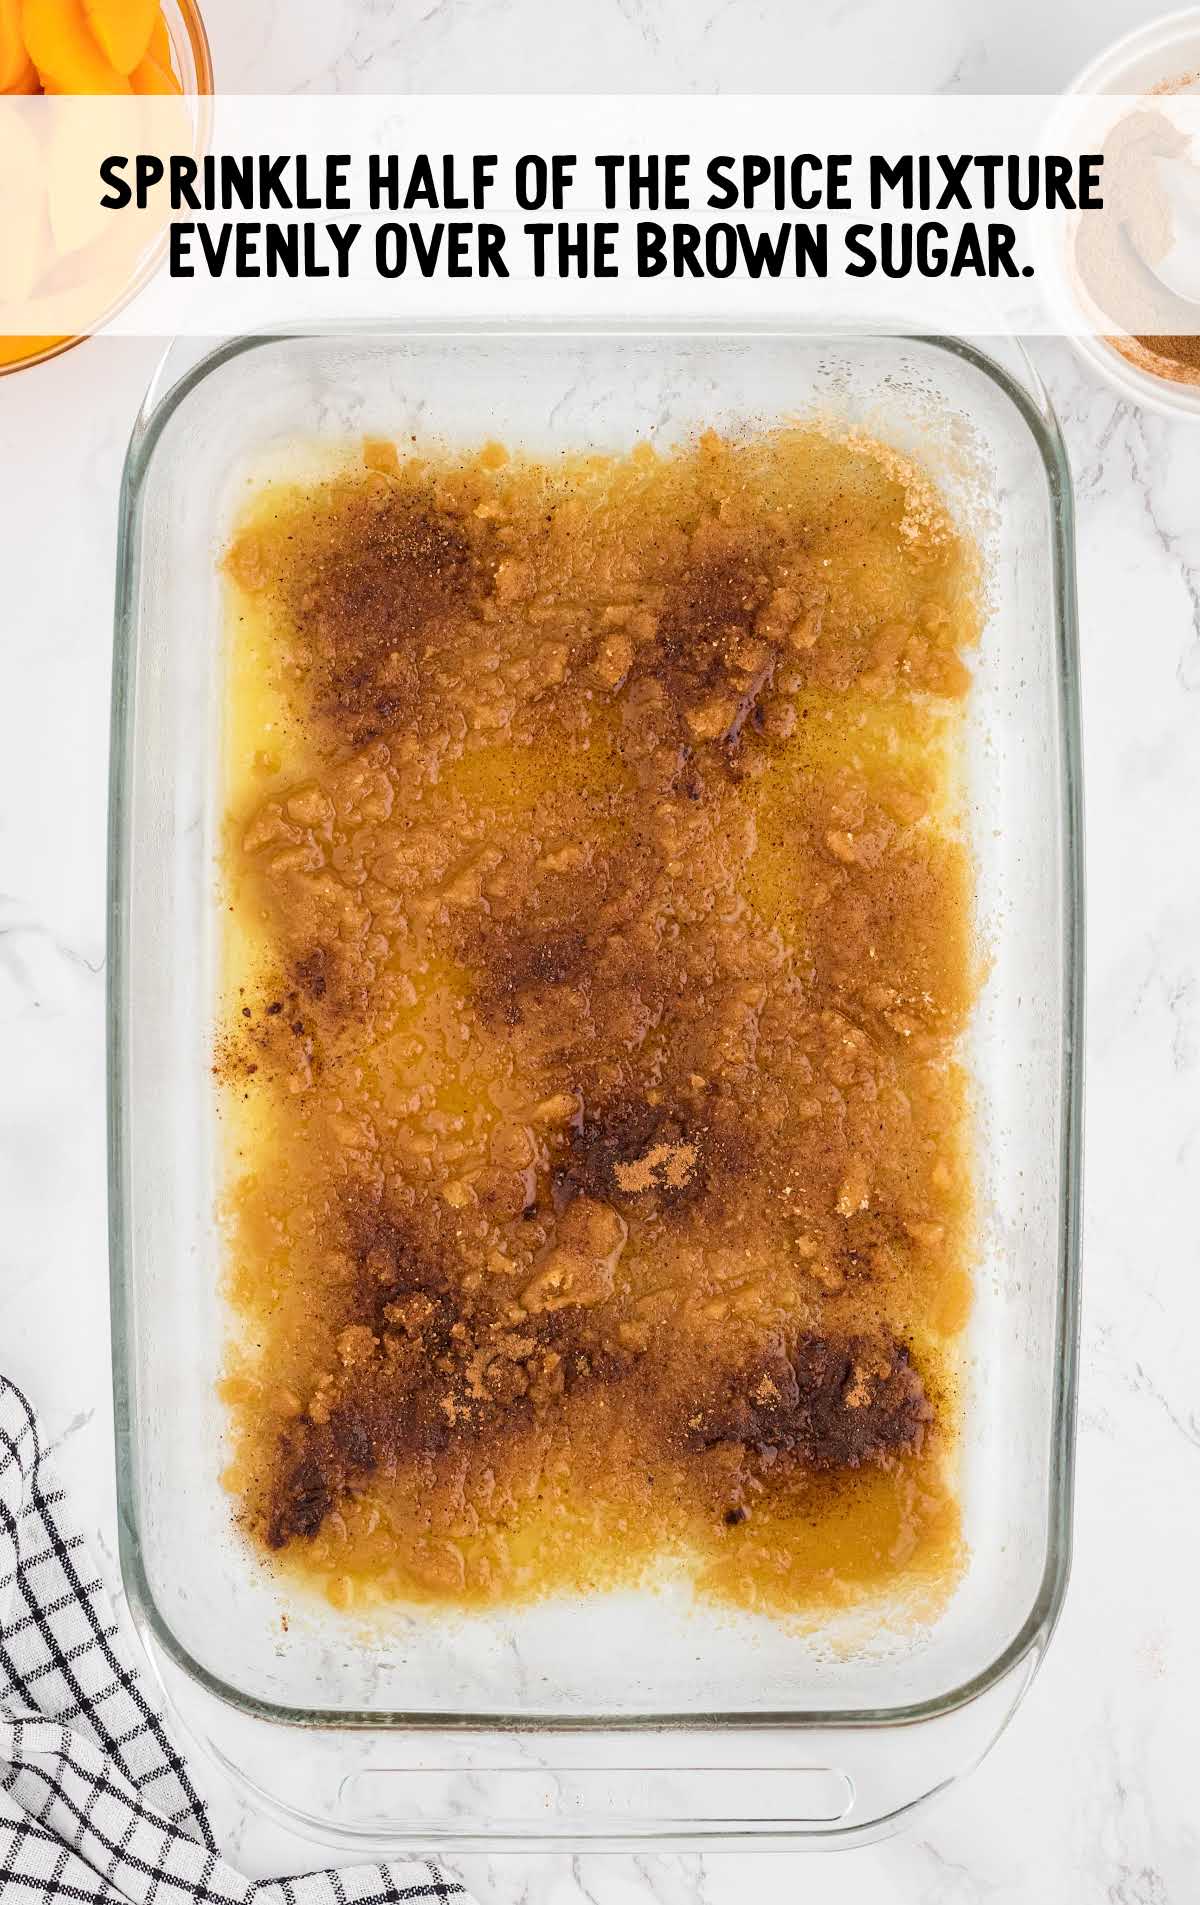 spice mixture poured over the brown sugar in a baking dish